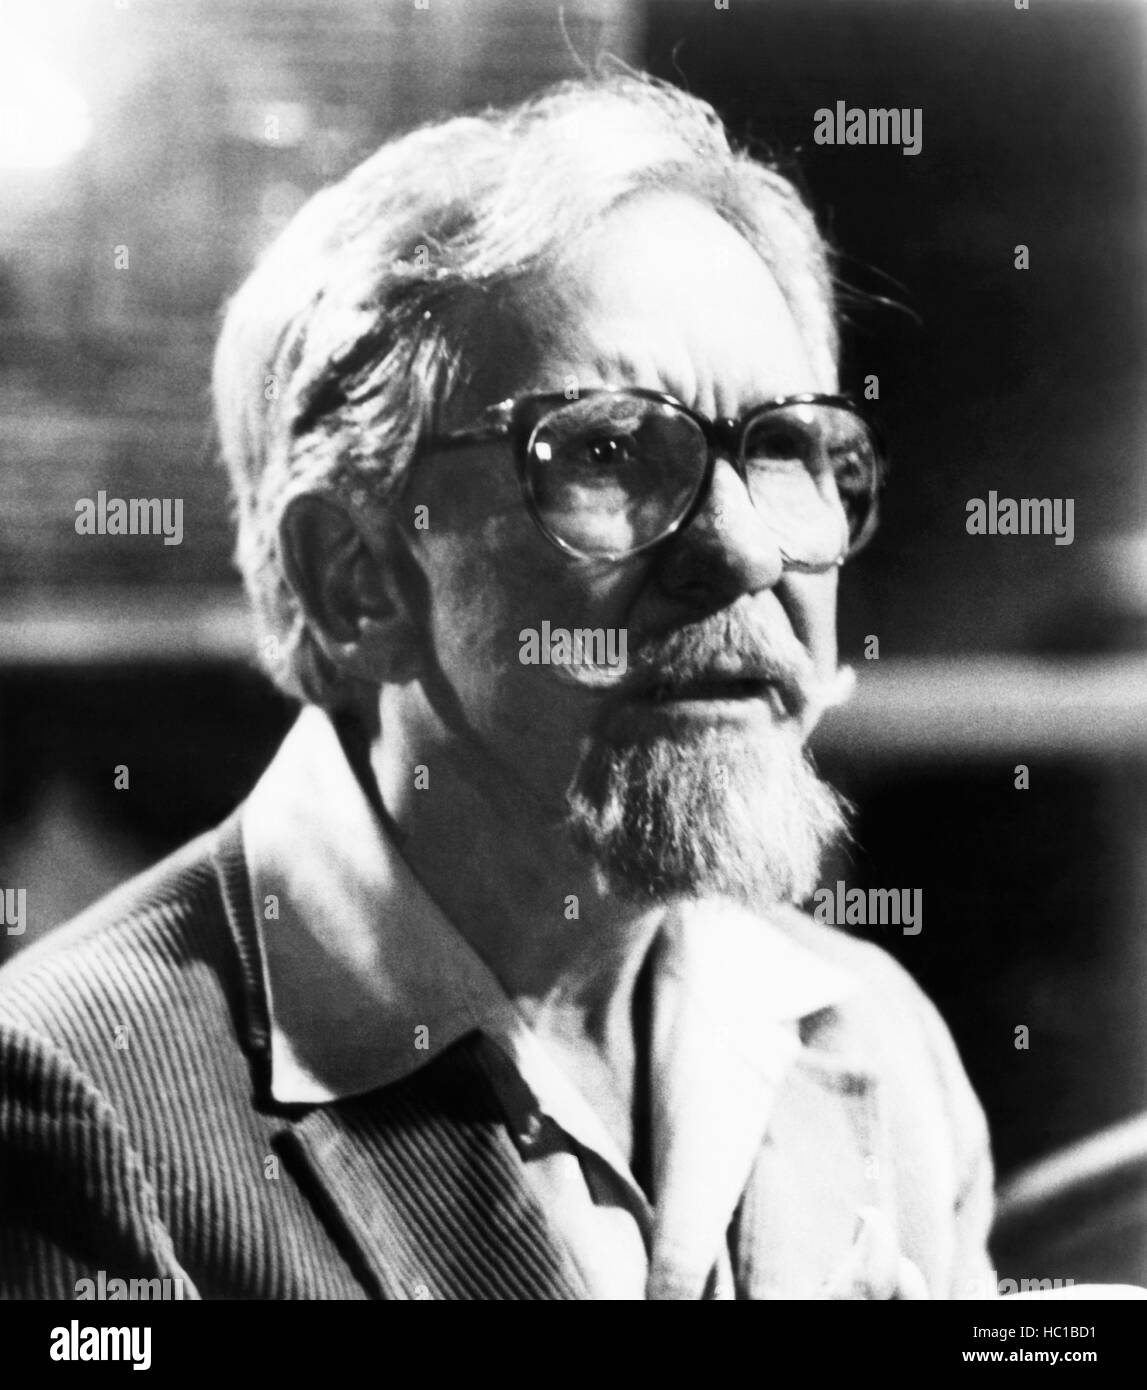 THE MANITOU, Burgess Meredith, 1978. ©AVCO Embassy Pictures/Courtesy Everett Collection Stock Photo